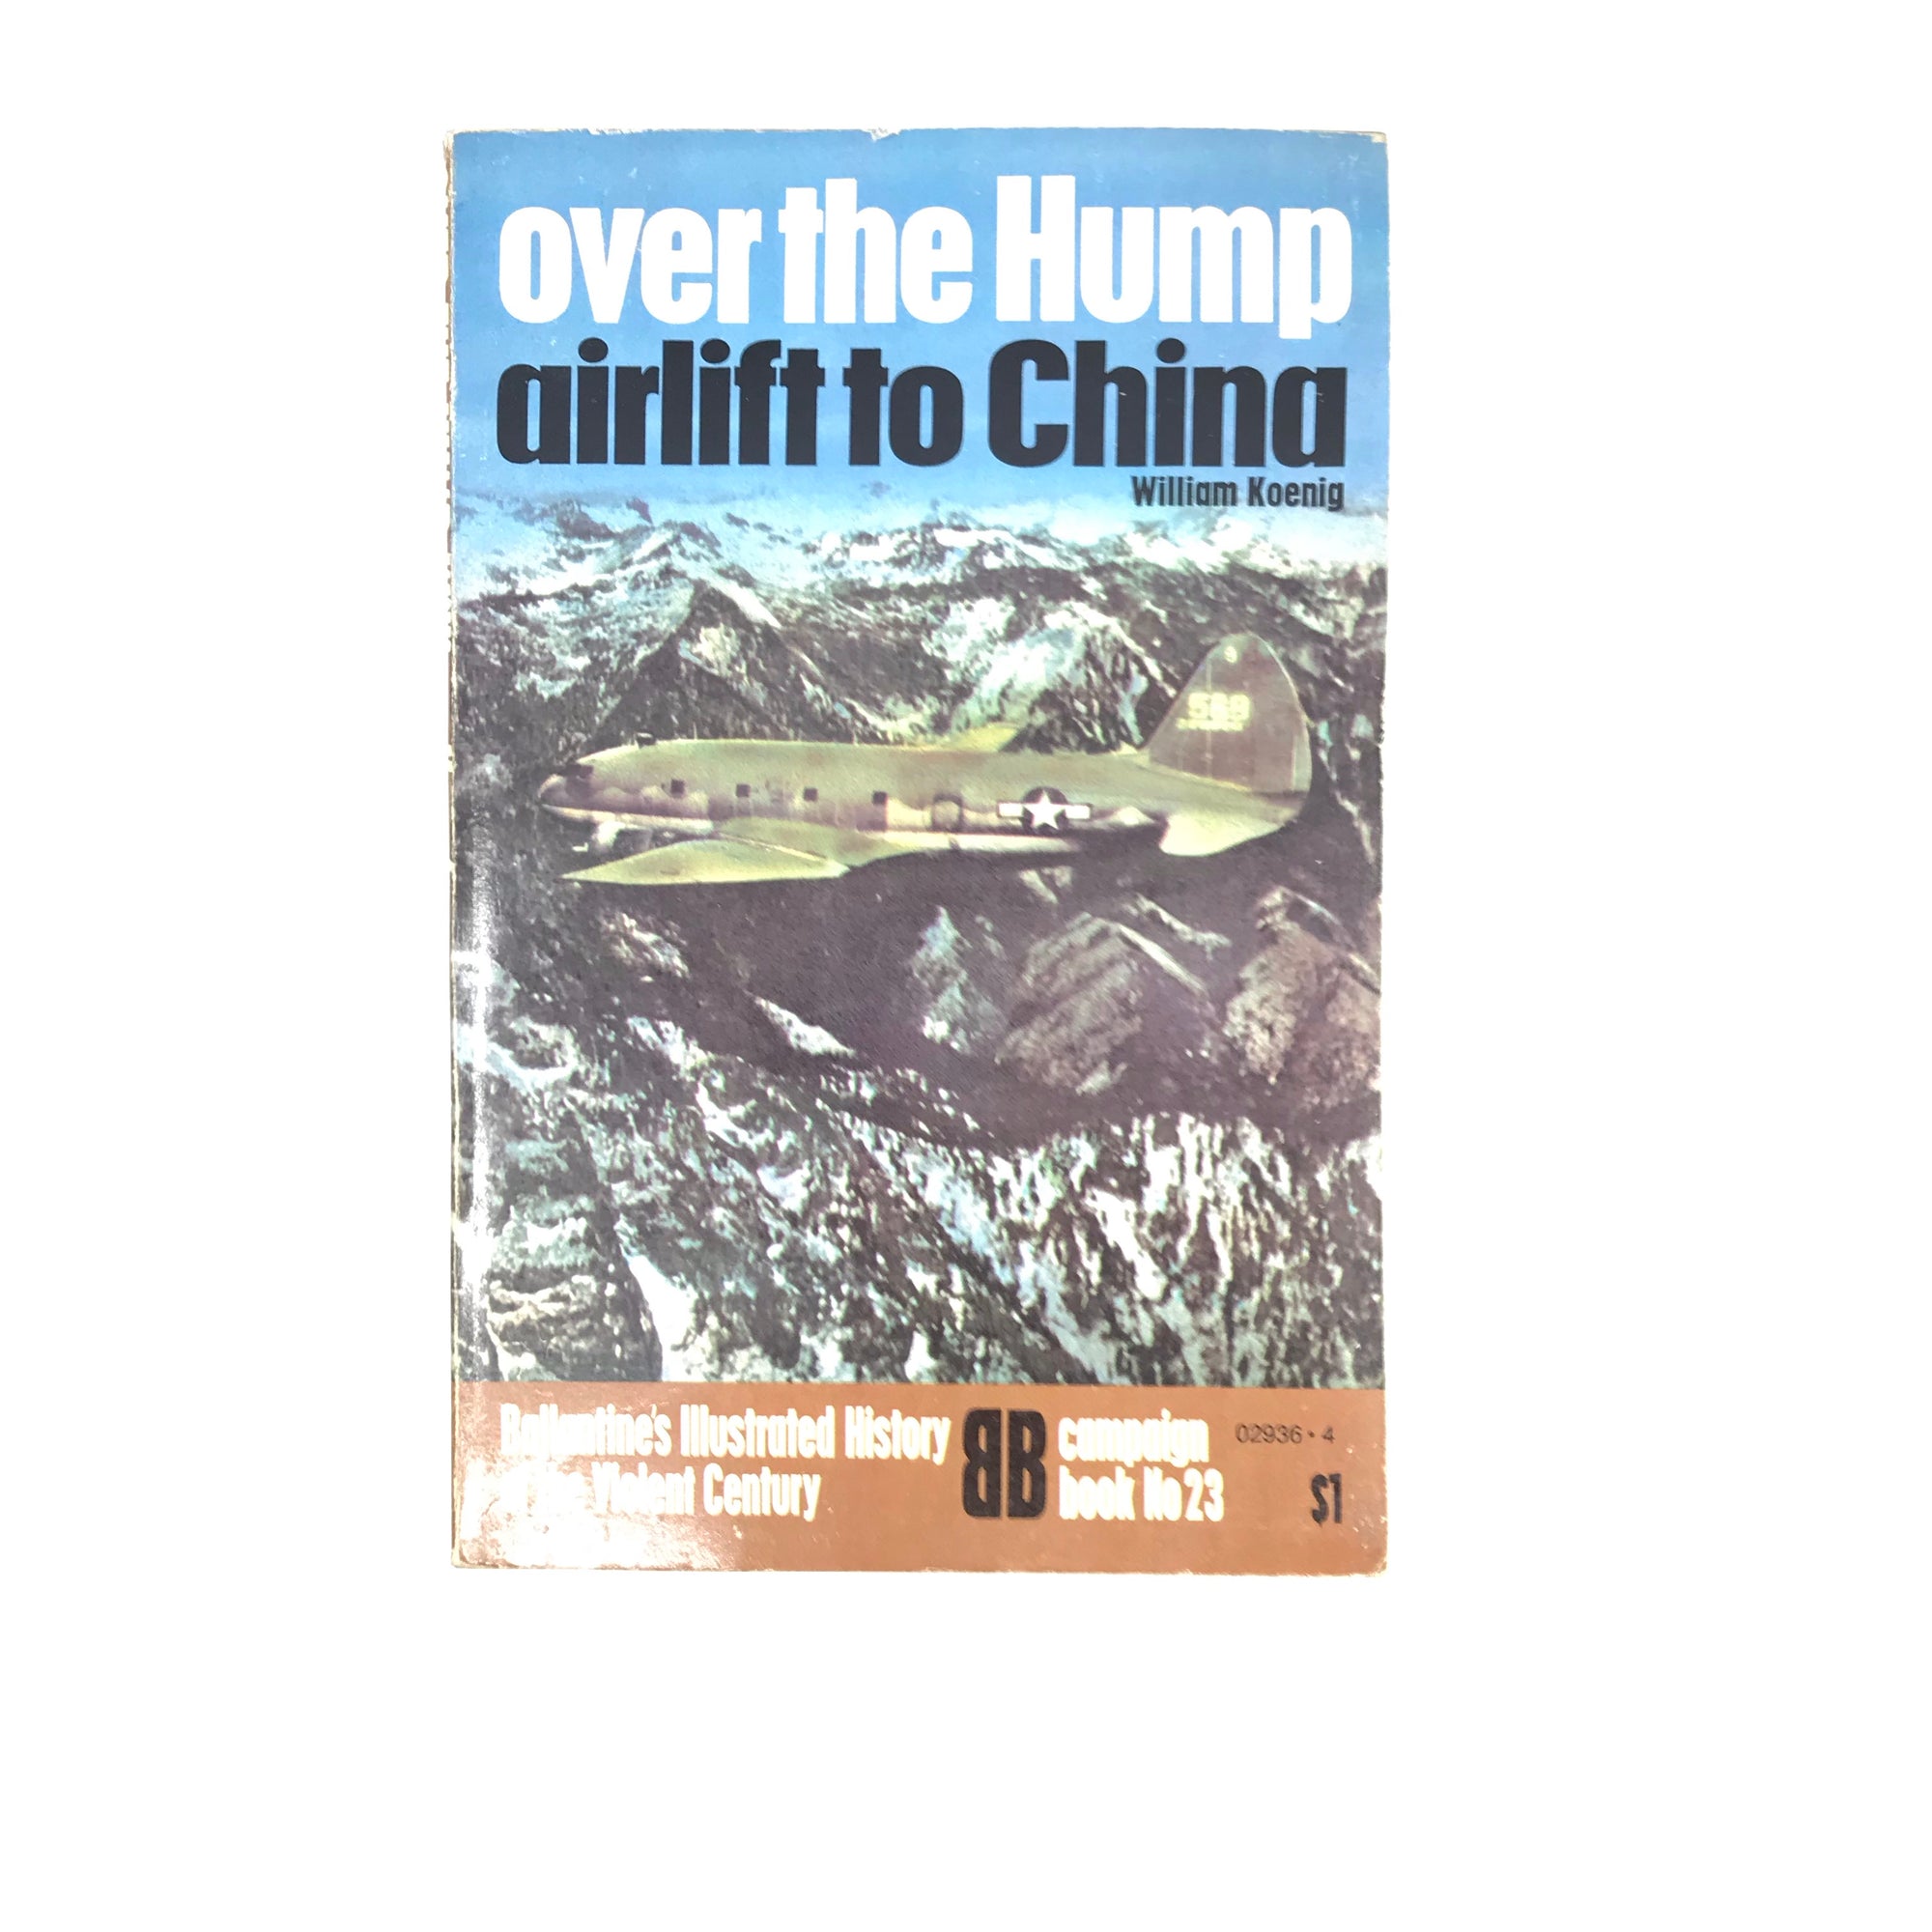 Ballantine's Illustrated History of the Violent Century: Campaign Book No23 Over the Hump Airlift to China (William Koenig)